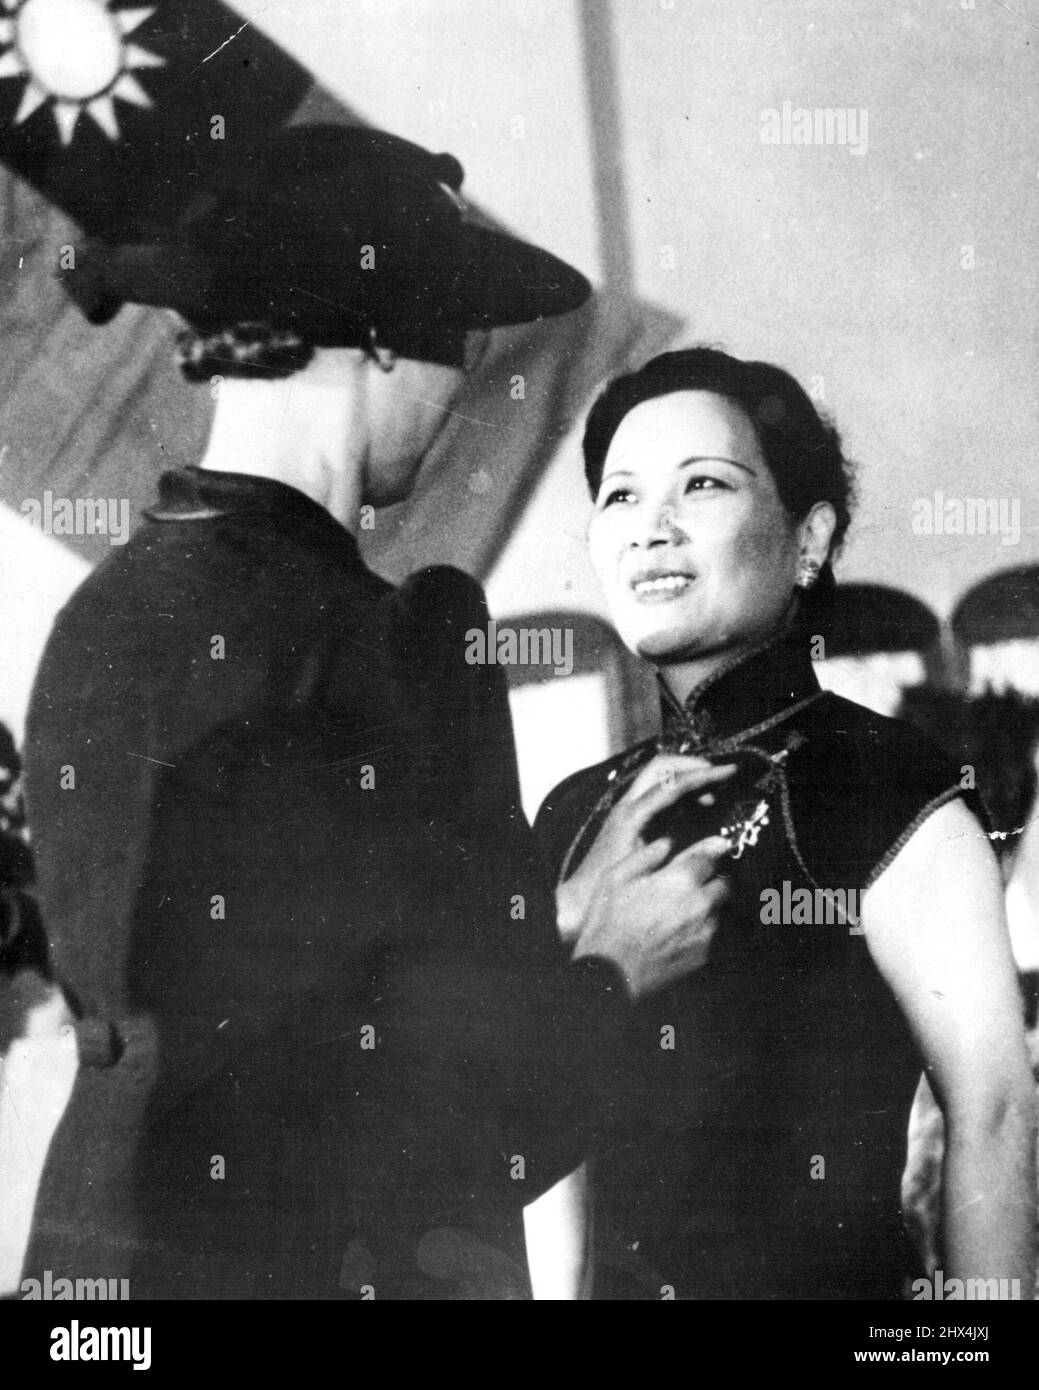 Madame Chiang Kai-Shek Honored -- Miss Lily K. Haass (left), A Y. W. C. A. Secretary, pins an emblem of honor on the gown of China's first Lady, Madame Chiang Kai-Shek, at a Ceremony in Chungking. July 4, 1941. (Photo by Associated Press Photo). Stock Photo